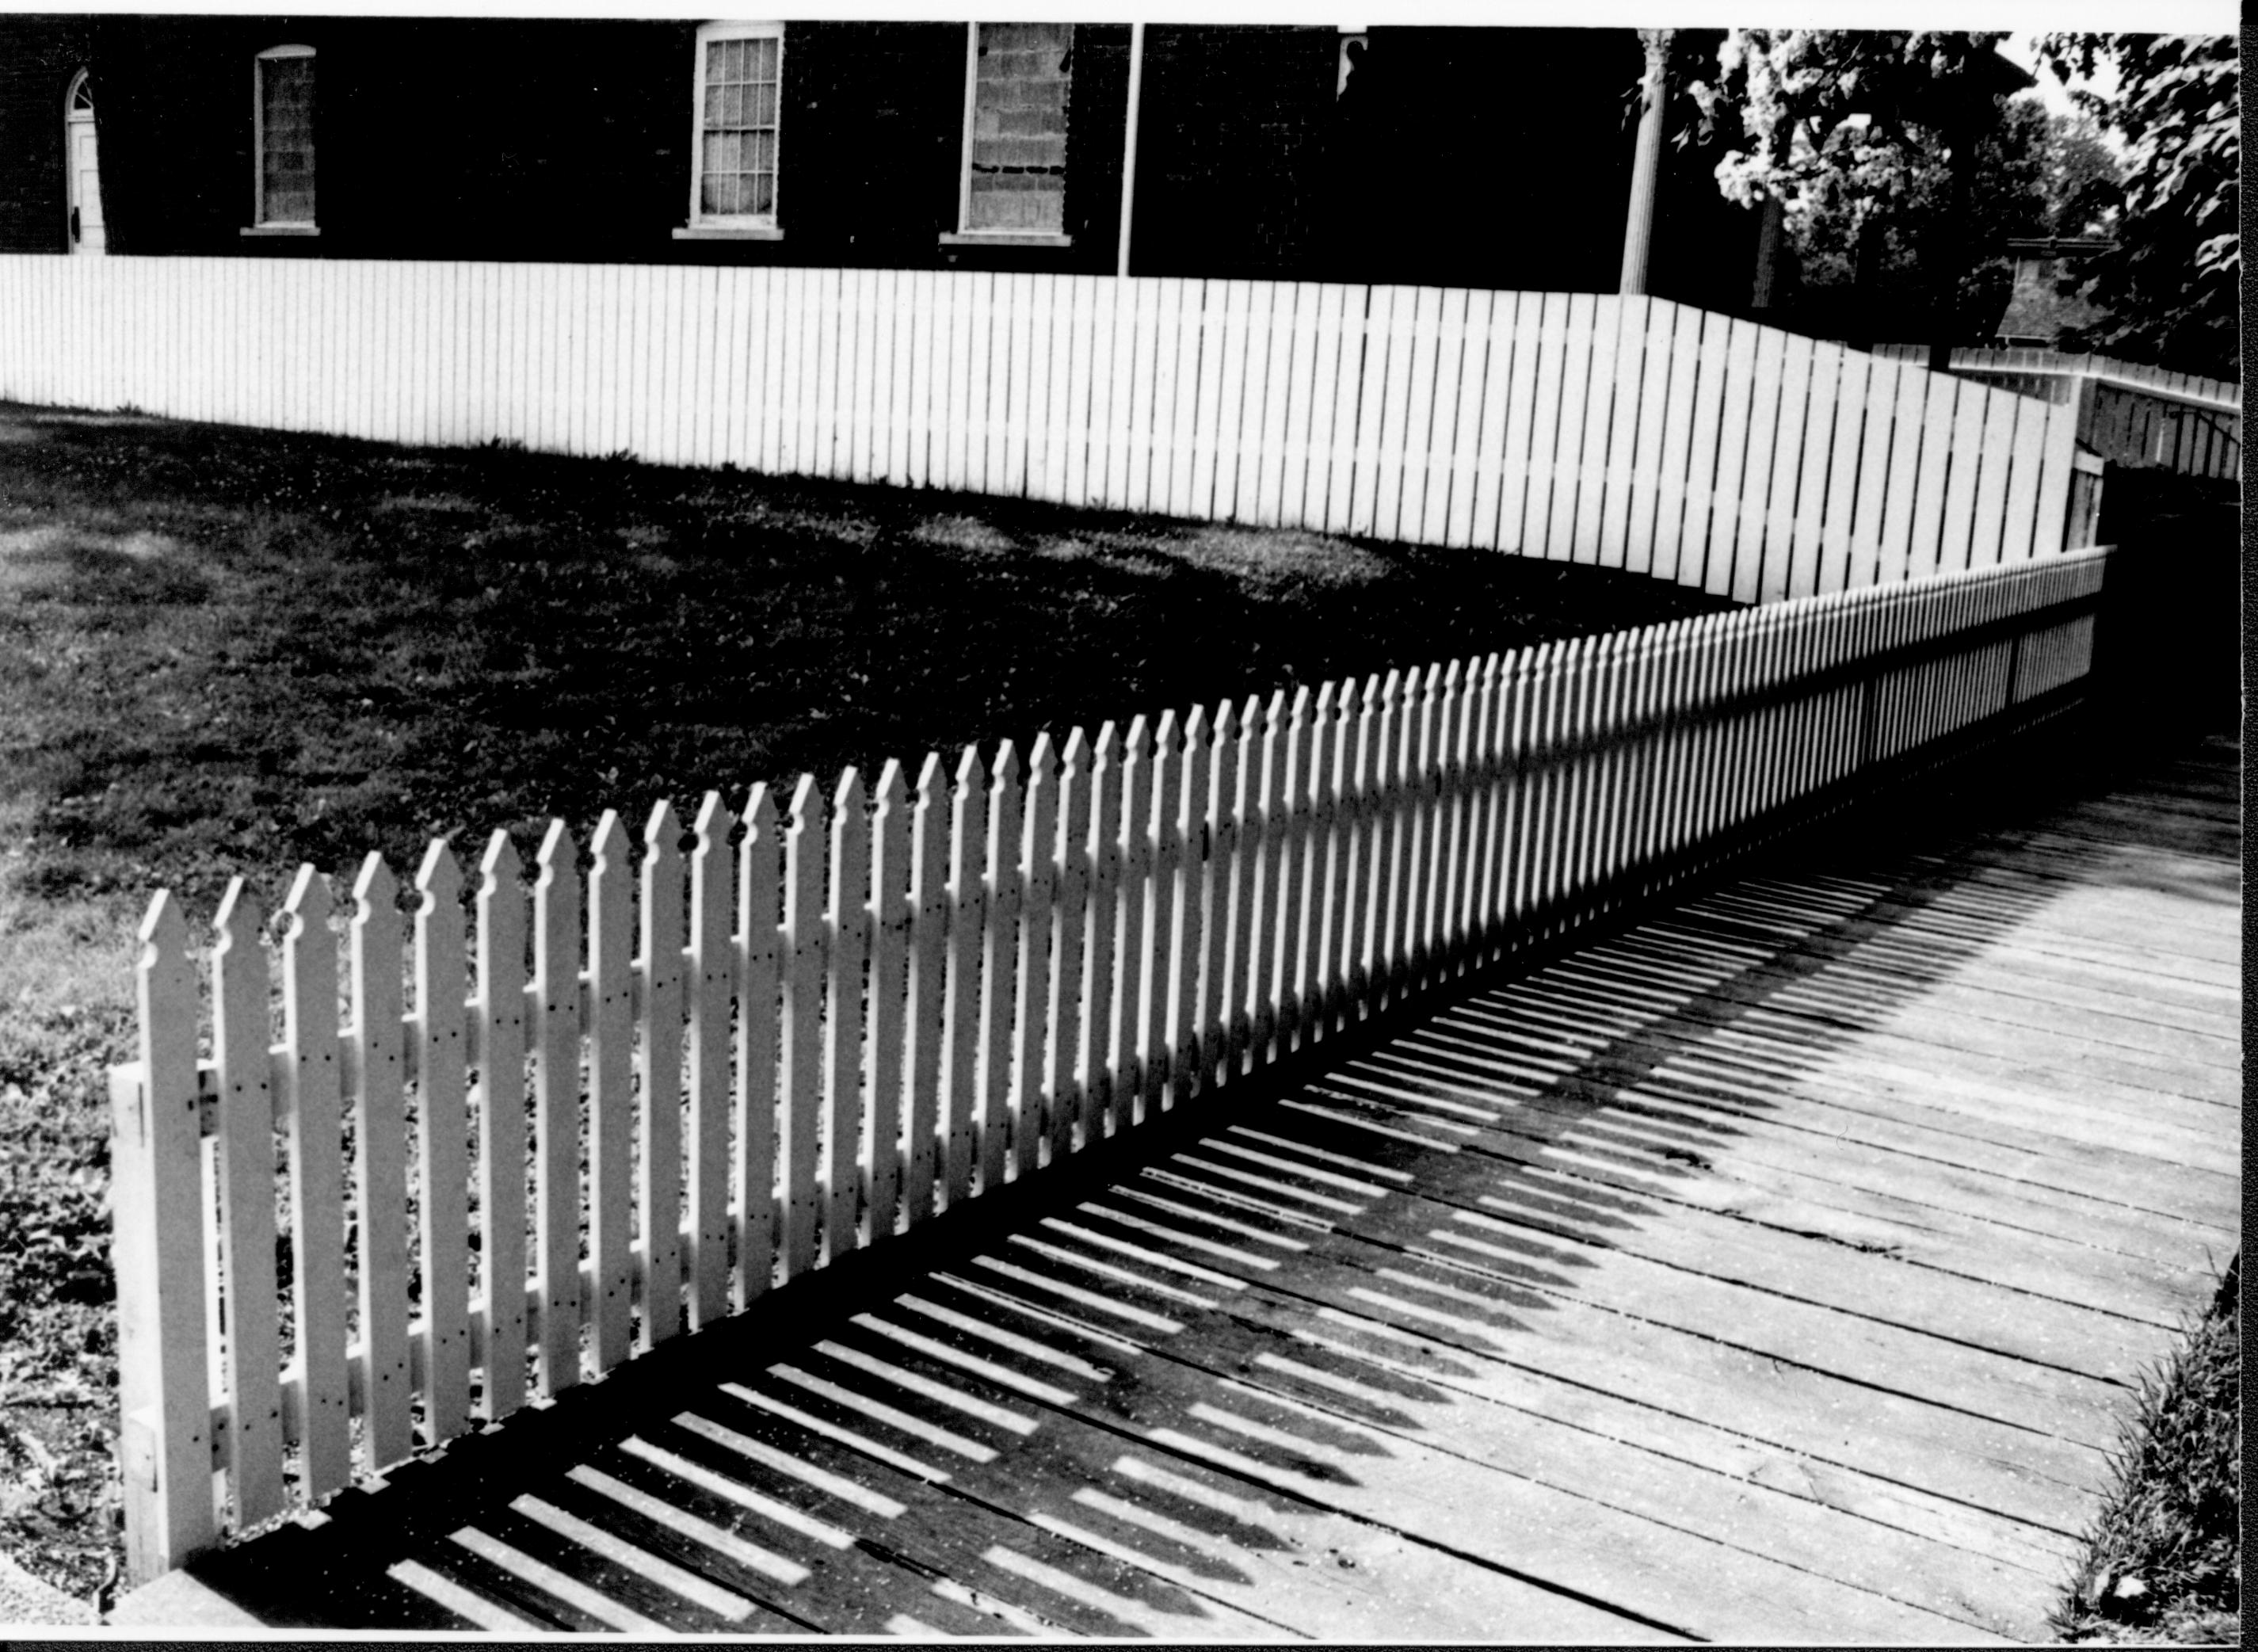 New vertical picket and property line fences 19 Block 10, Lot 1, Picket, Fence